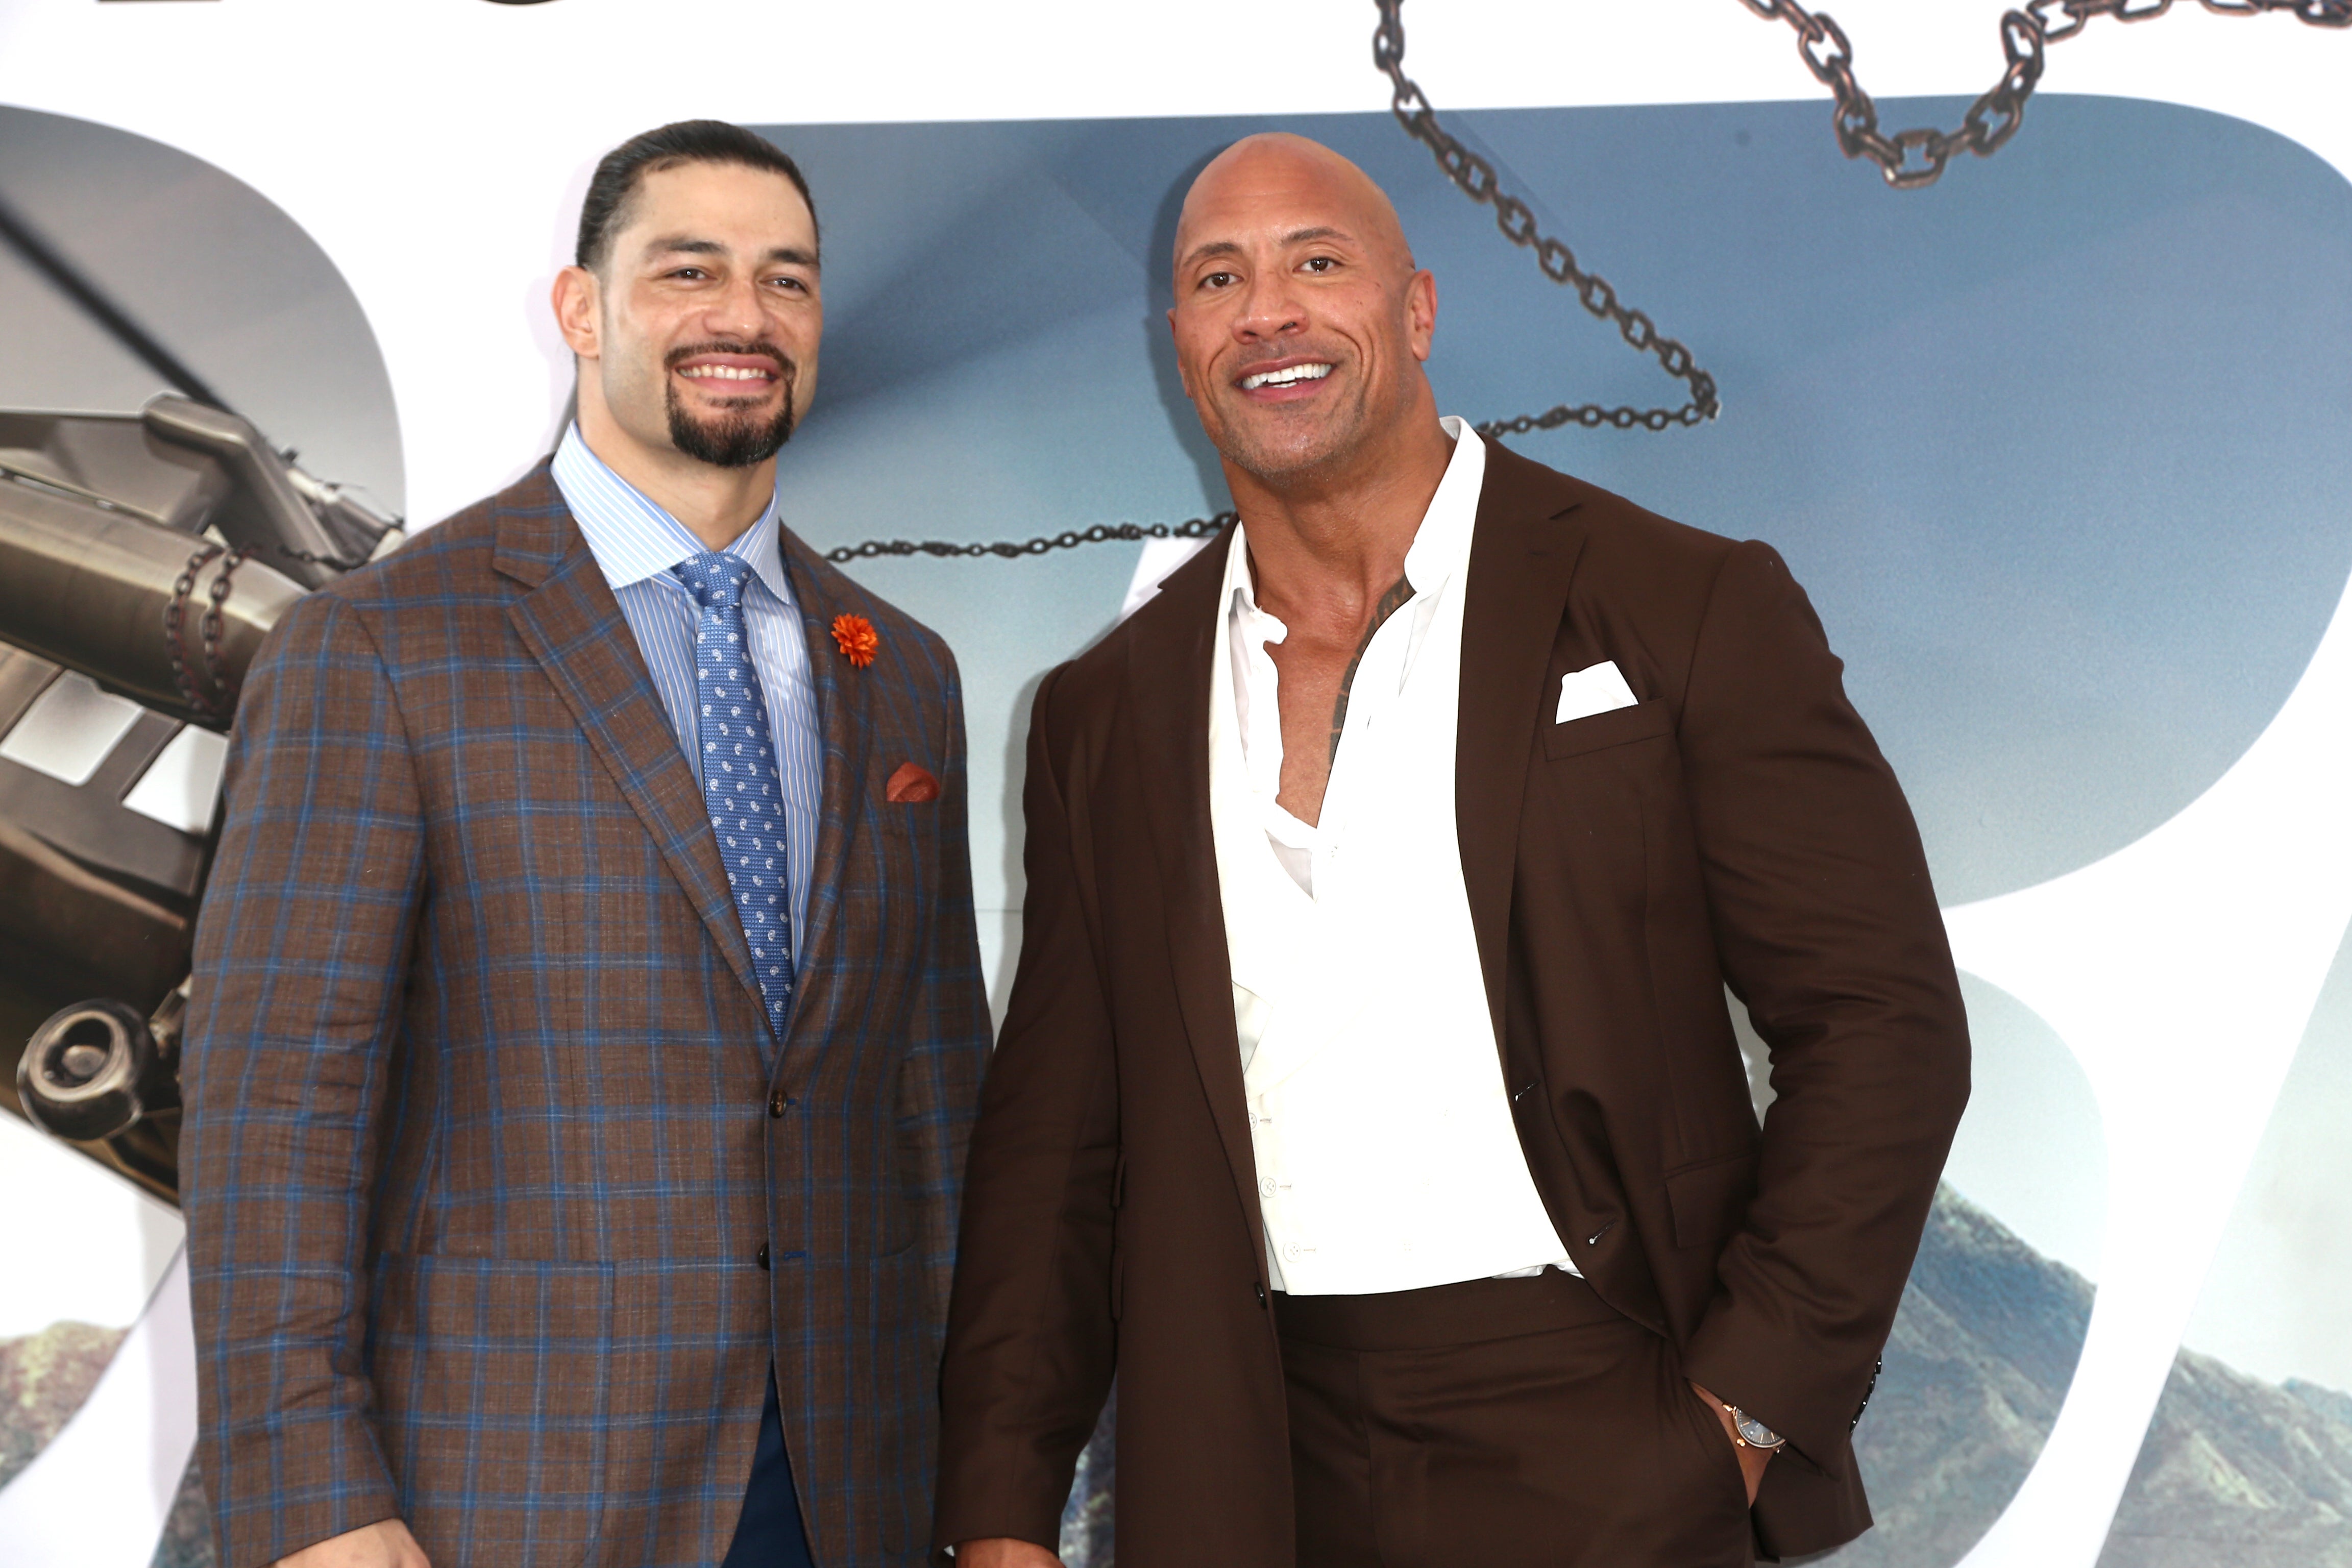 Here's How The Rock Looked After 18 Weeks of Hobbs and Shaw Training -  Men's Journal